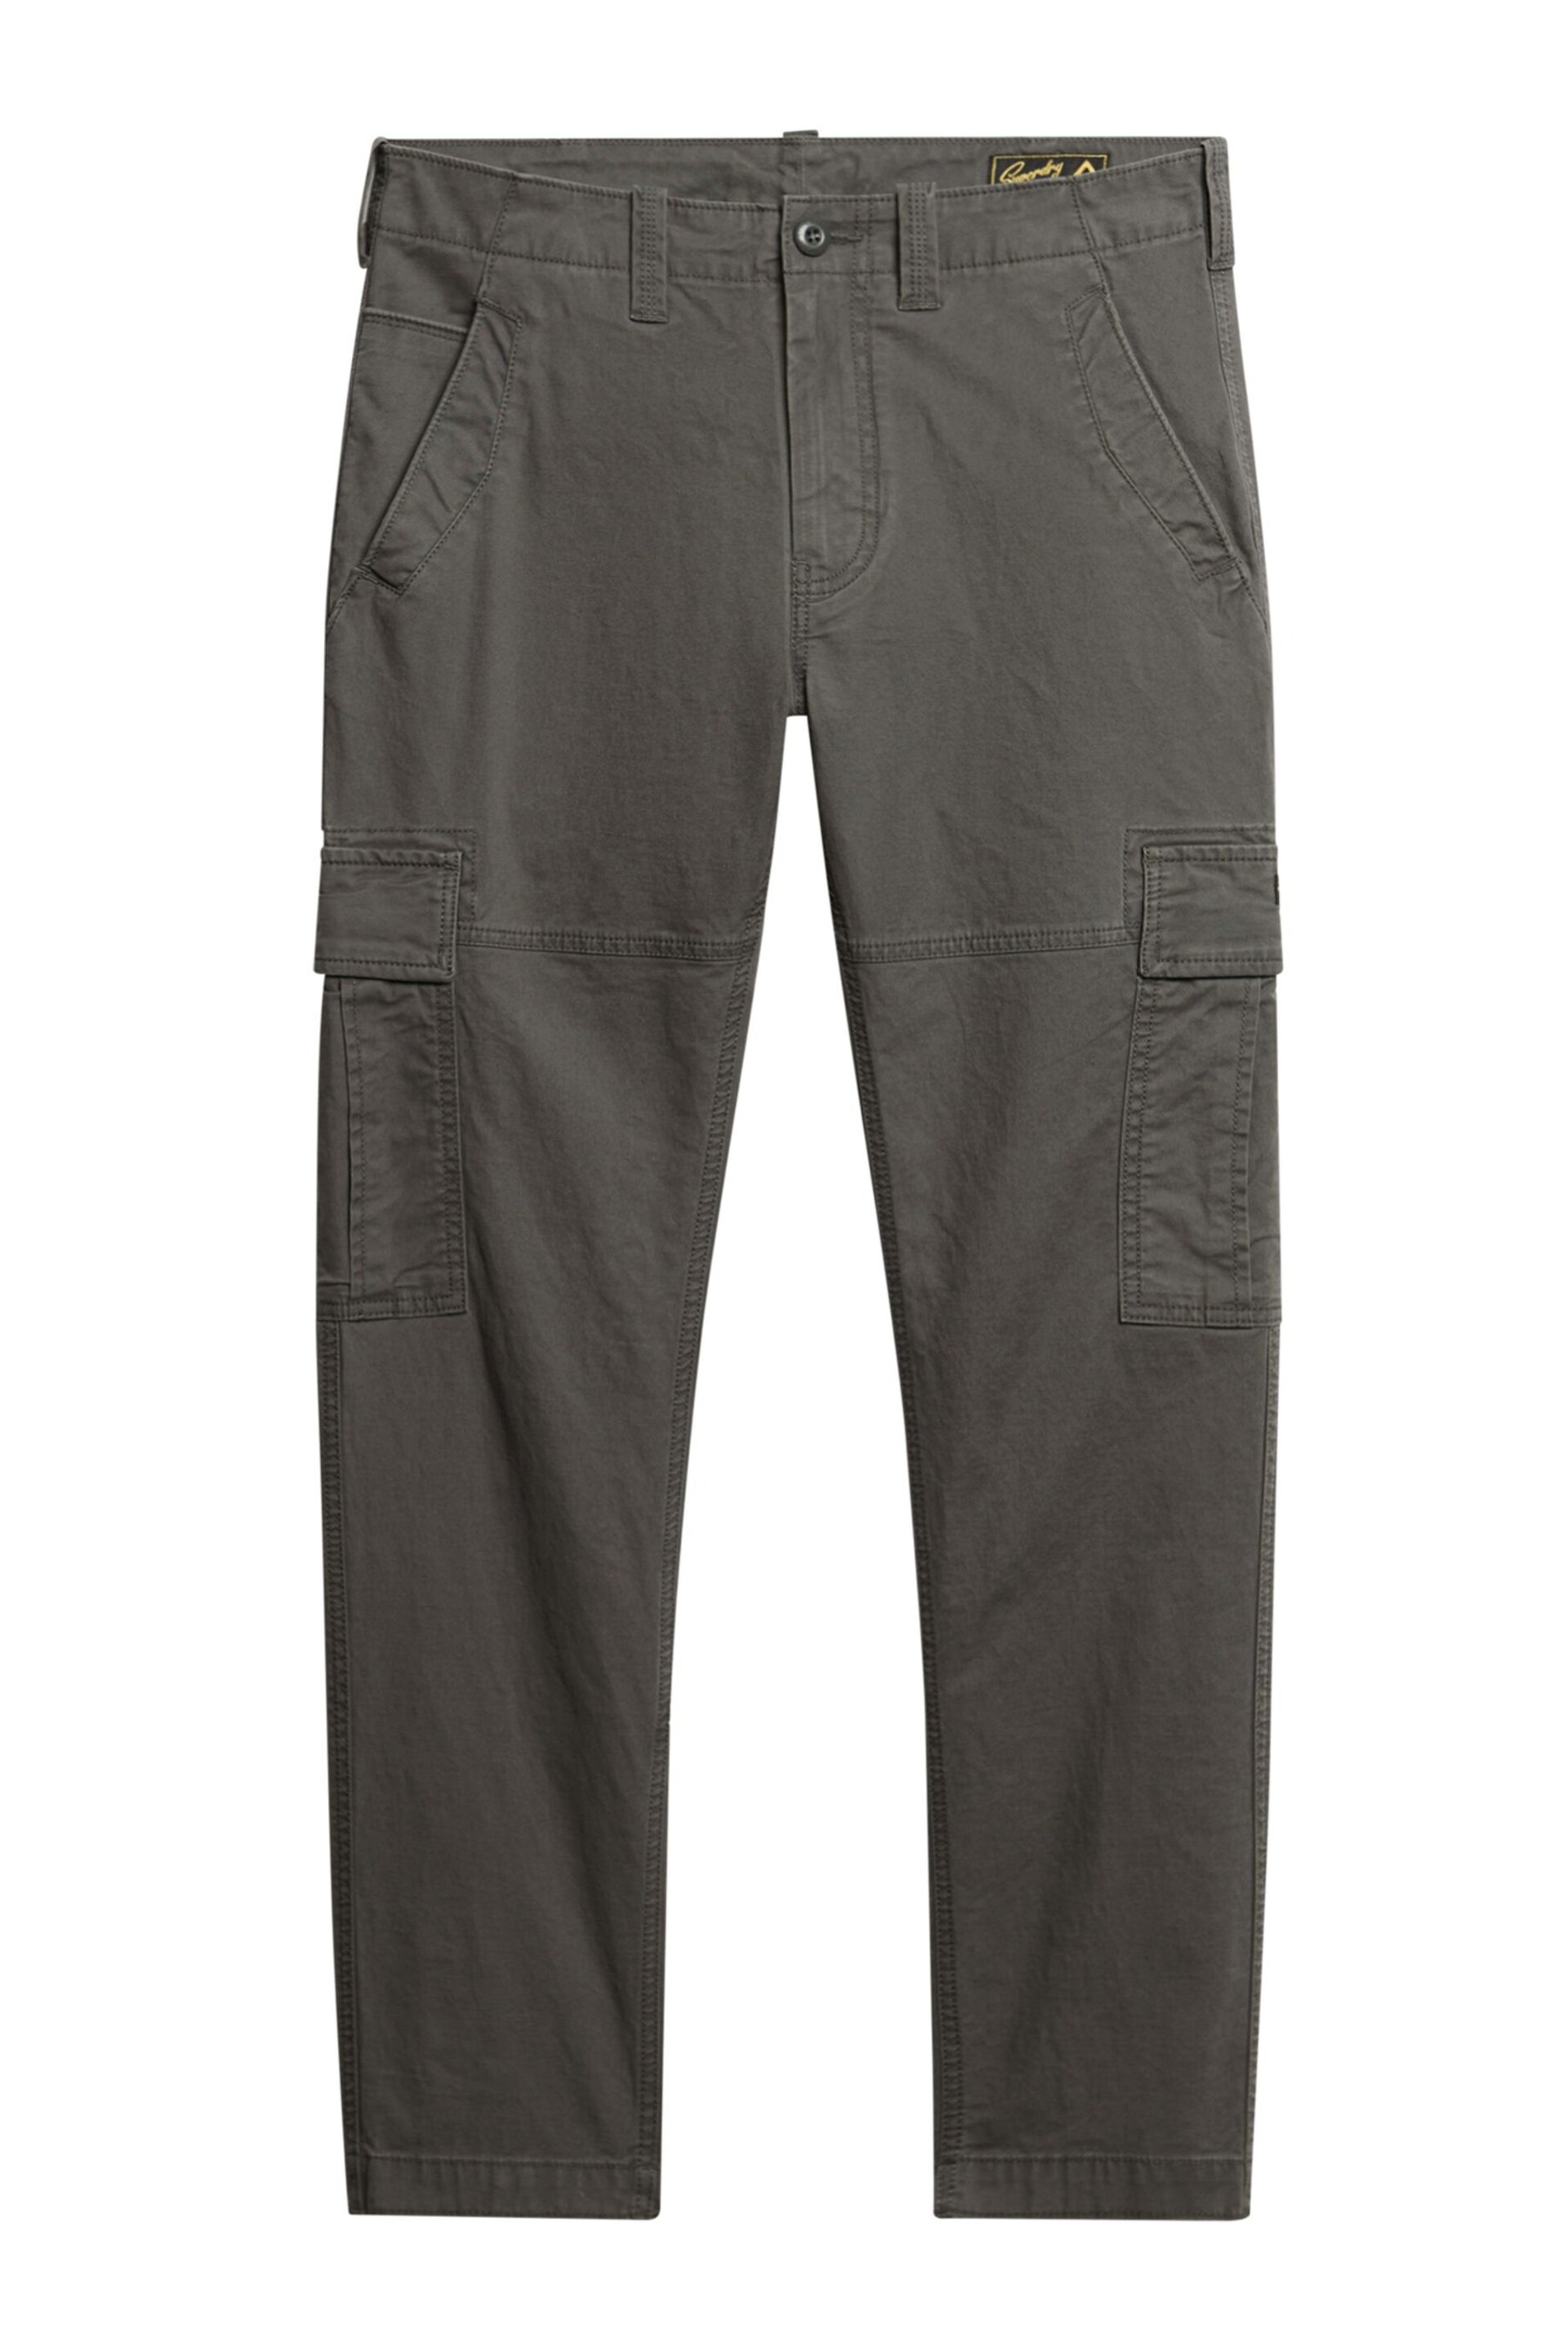 Superdry Grey Core Cargo Trousers - Image 4 of 7